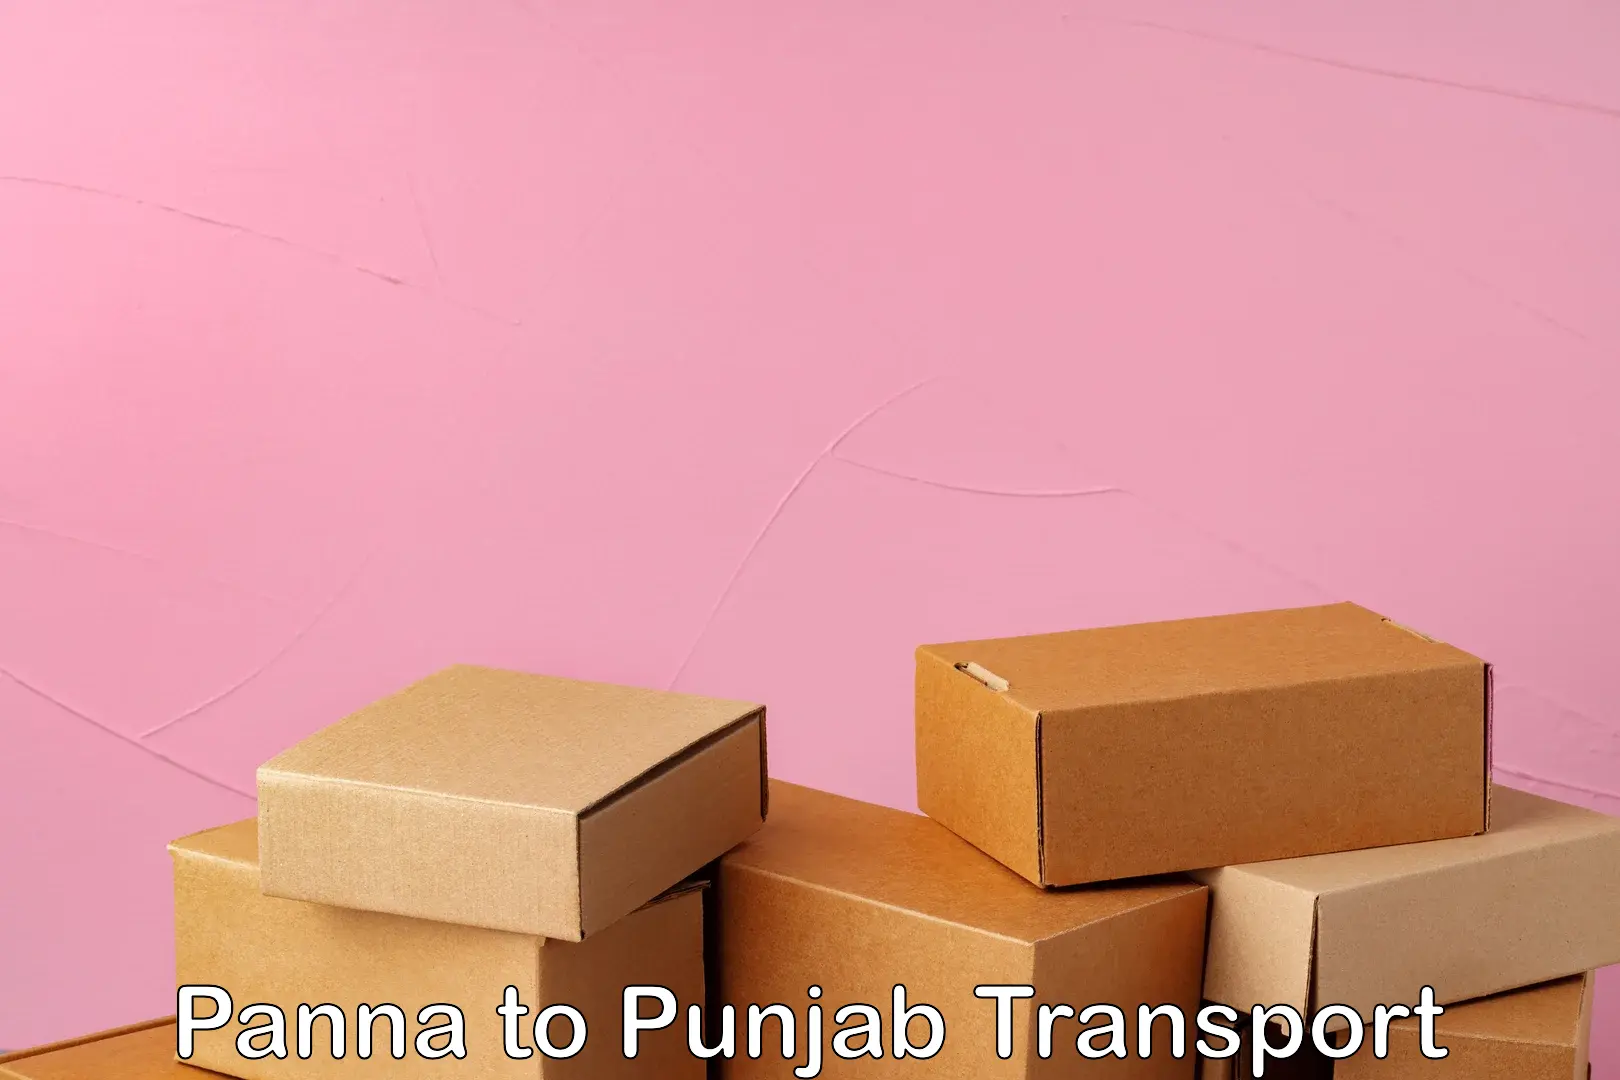 Truck transport companies in India Panna to Punjab